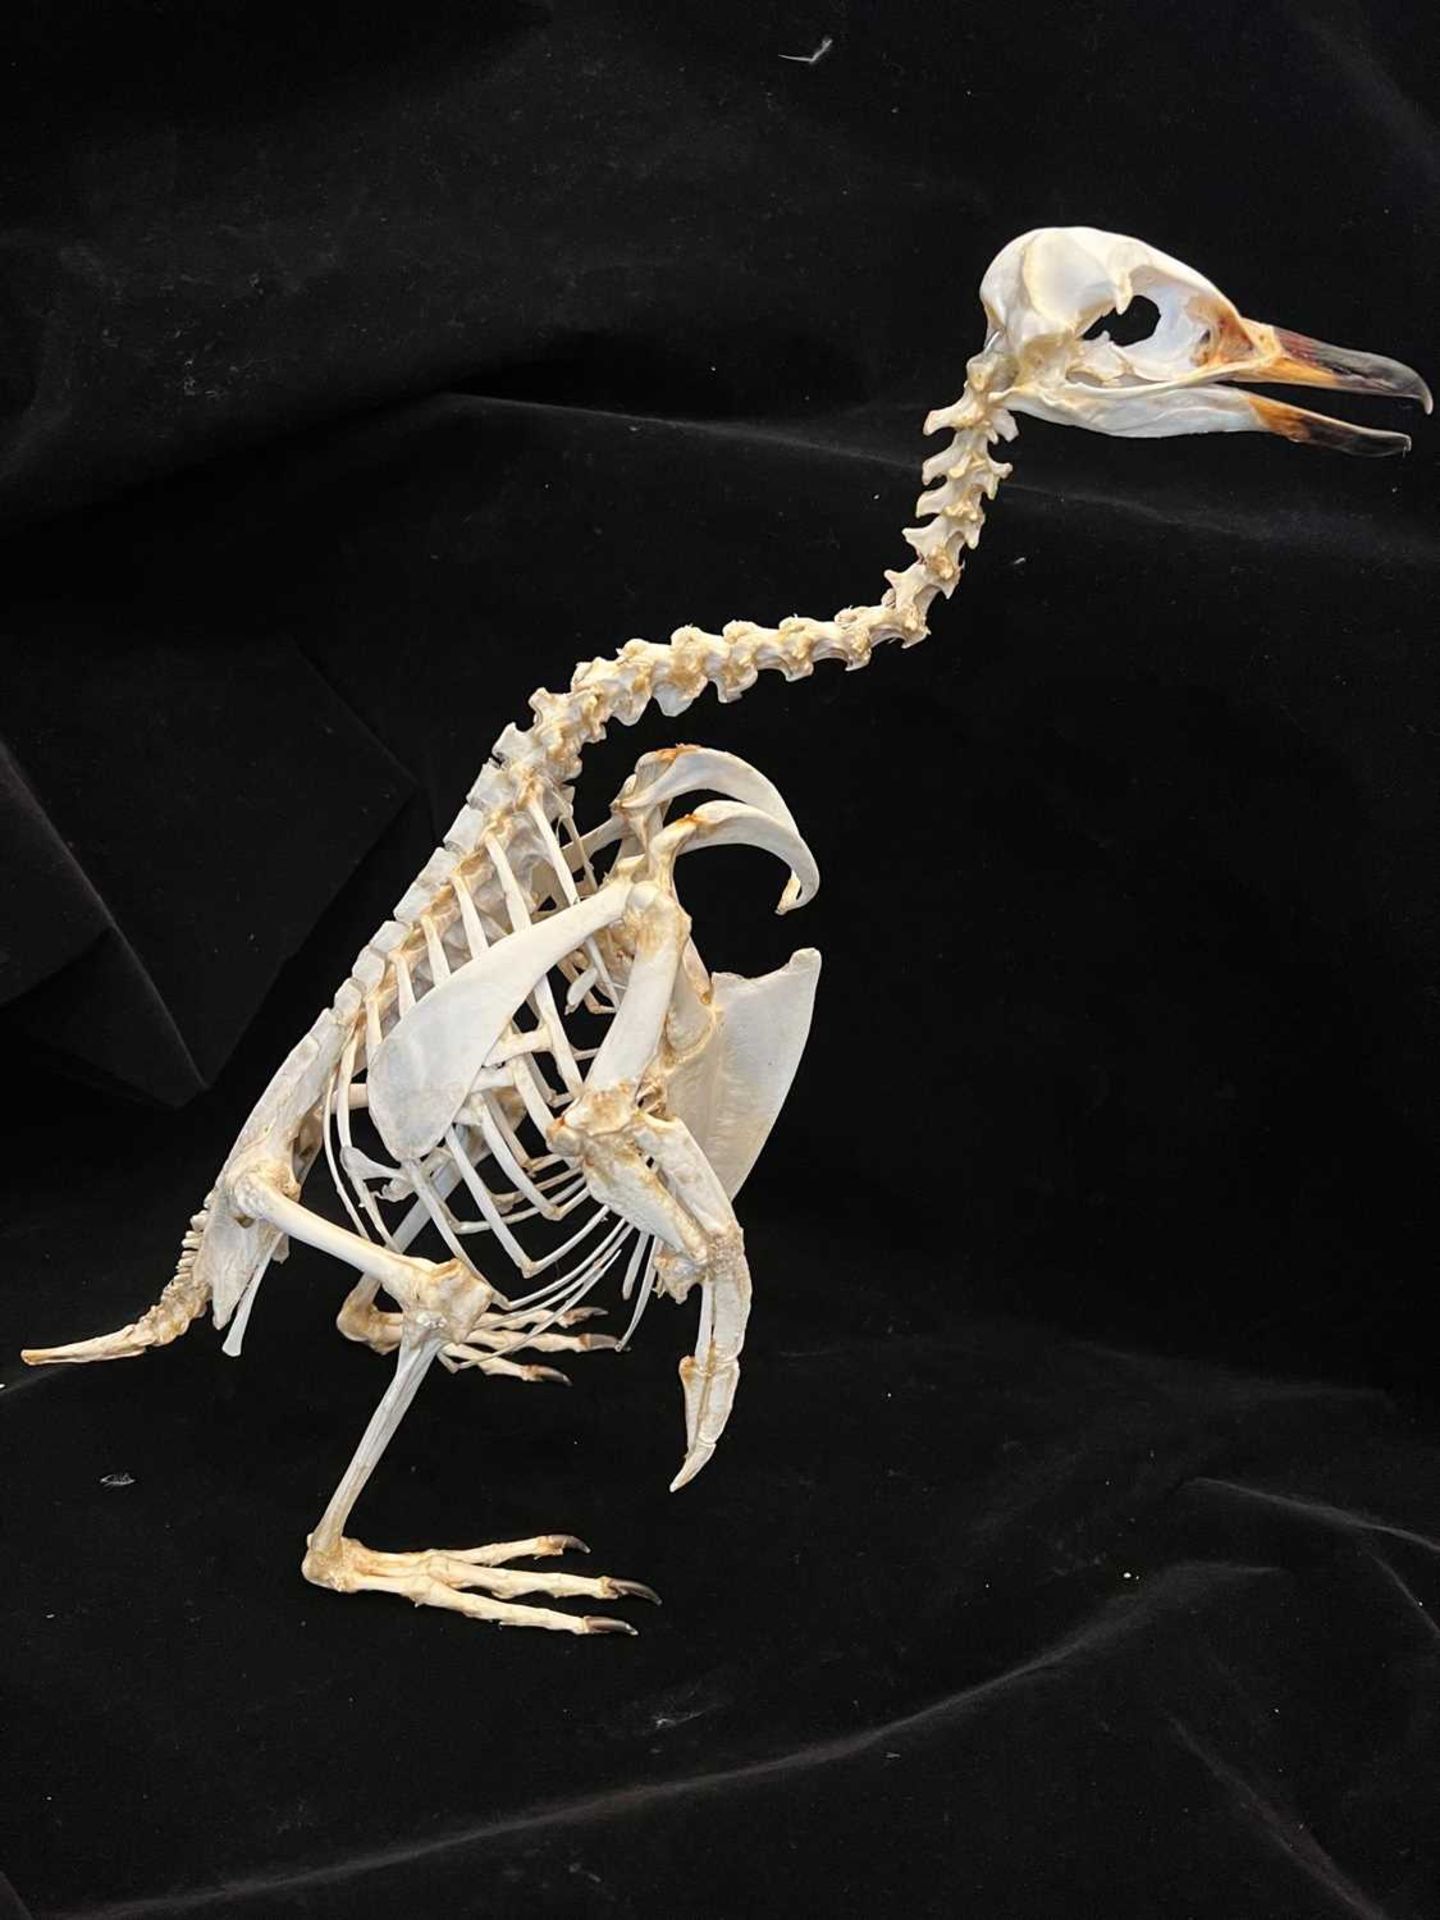 A TAXIDERMY / OSTEOLOGY PENGUIN SKELETON. - Image 6 of 8